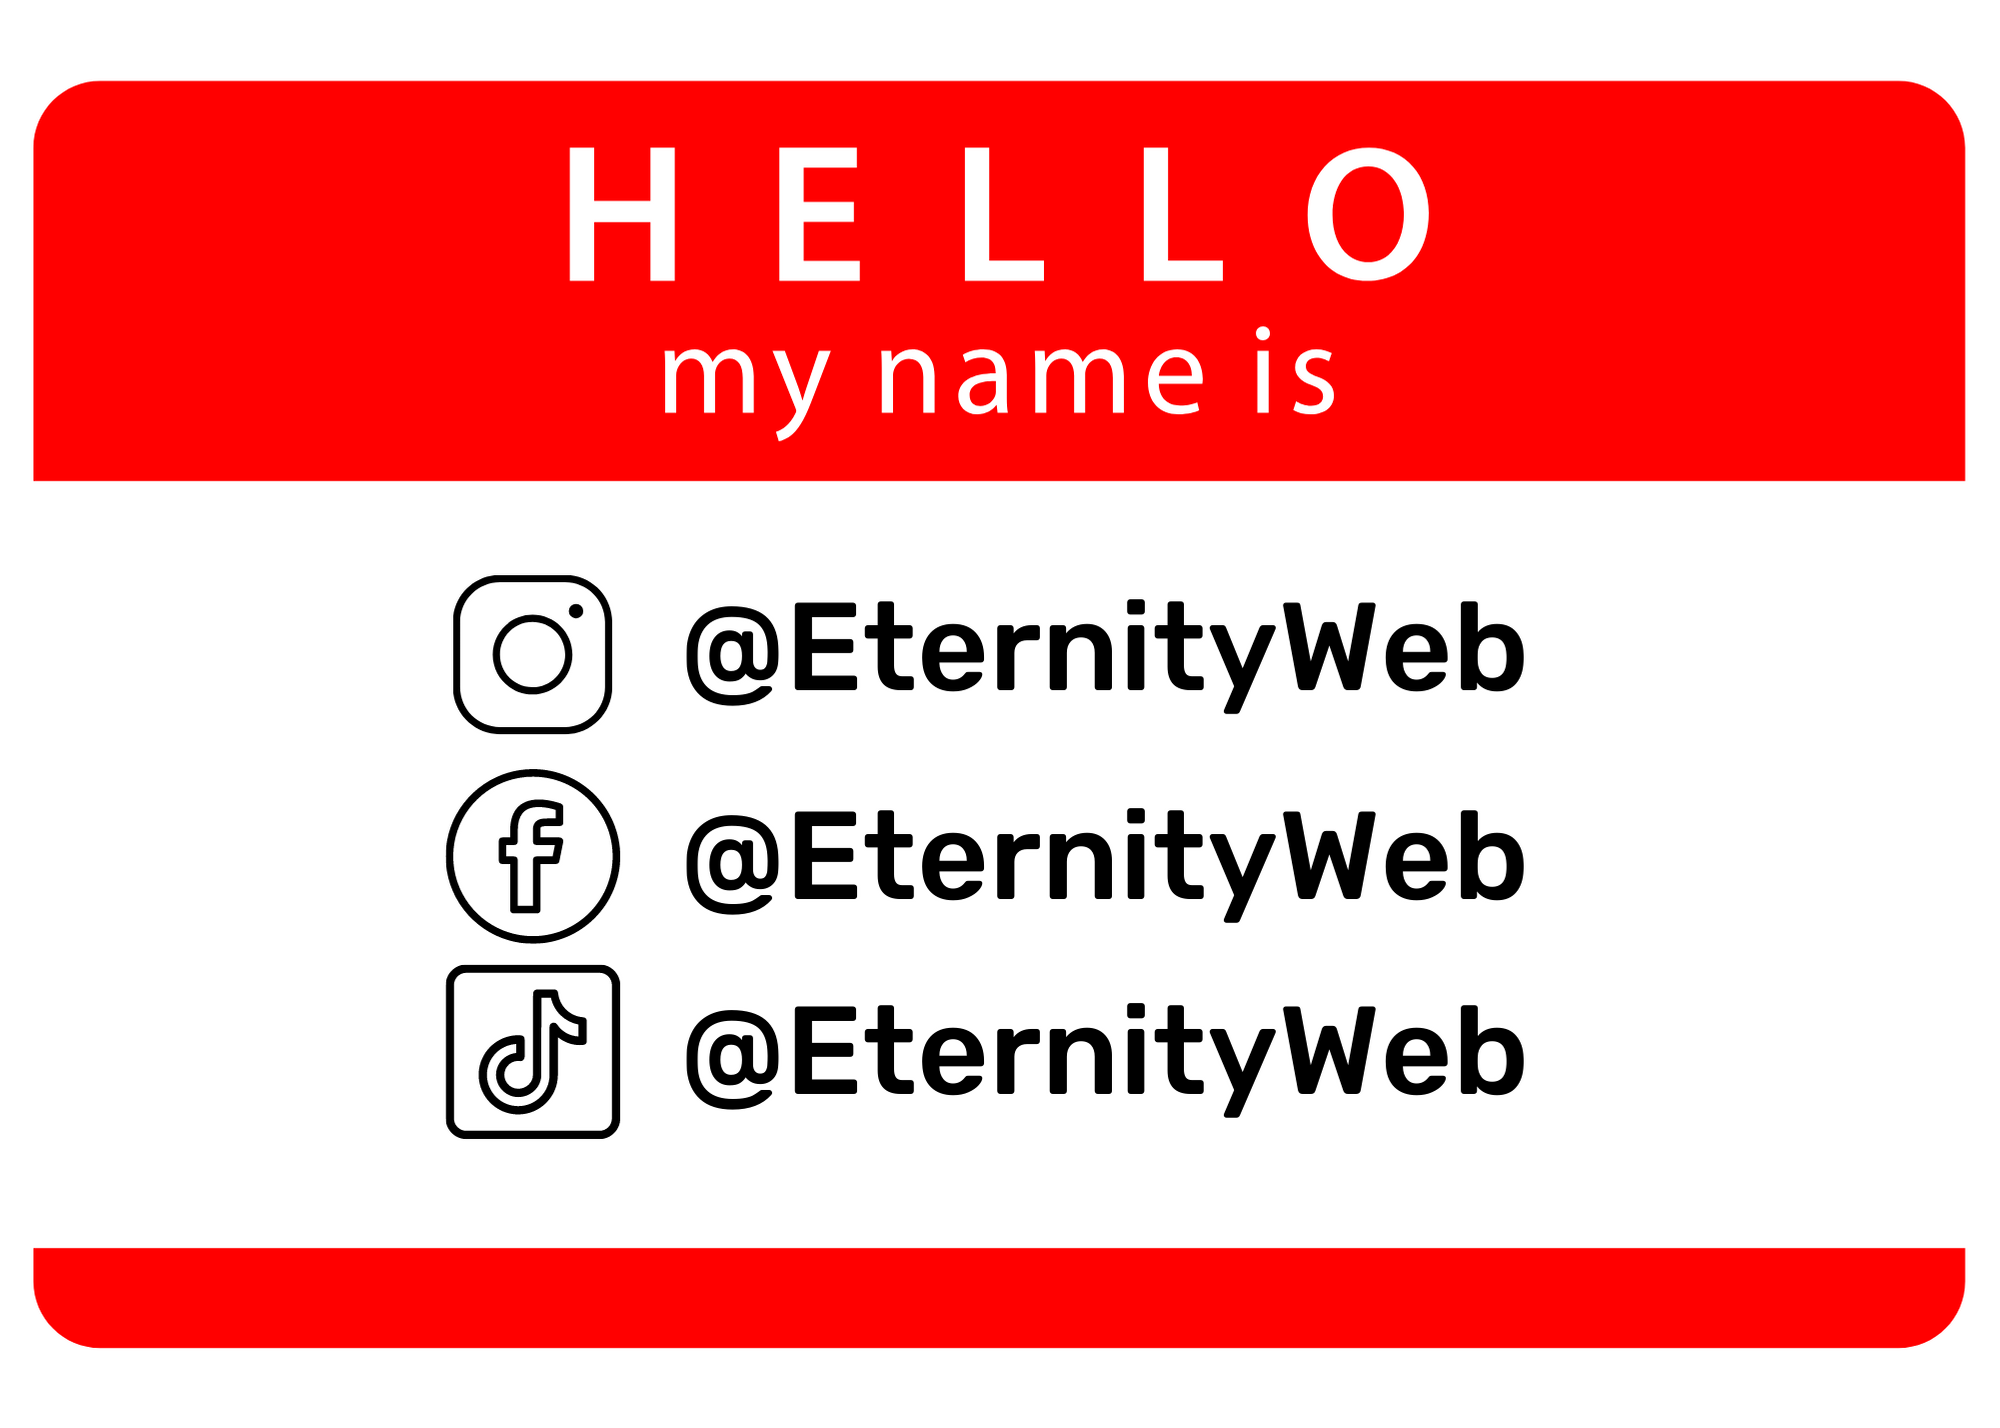 Graphic of a "hello my name is" name tag that has the @EternityWeb social handle on it.